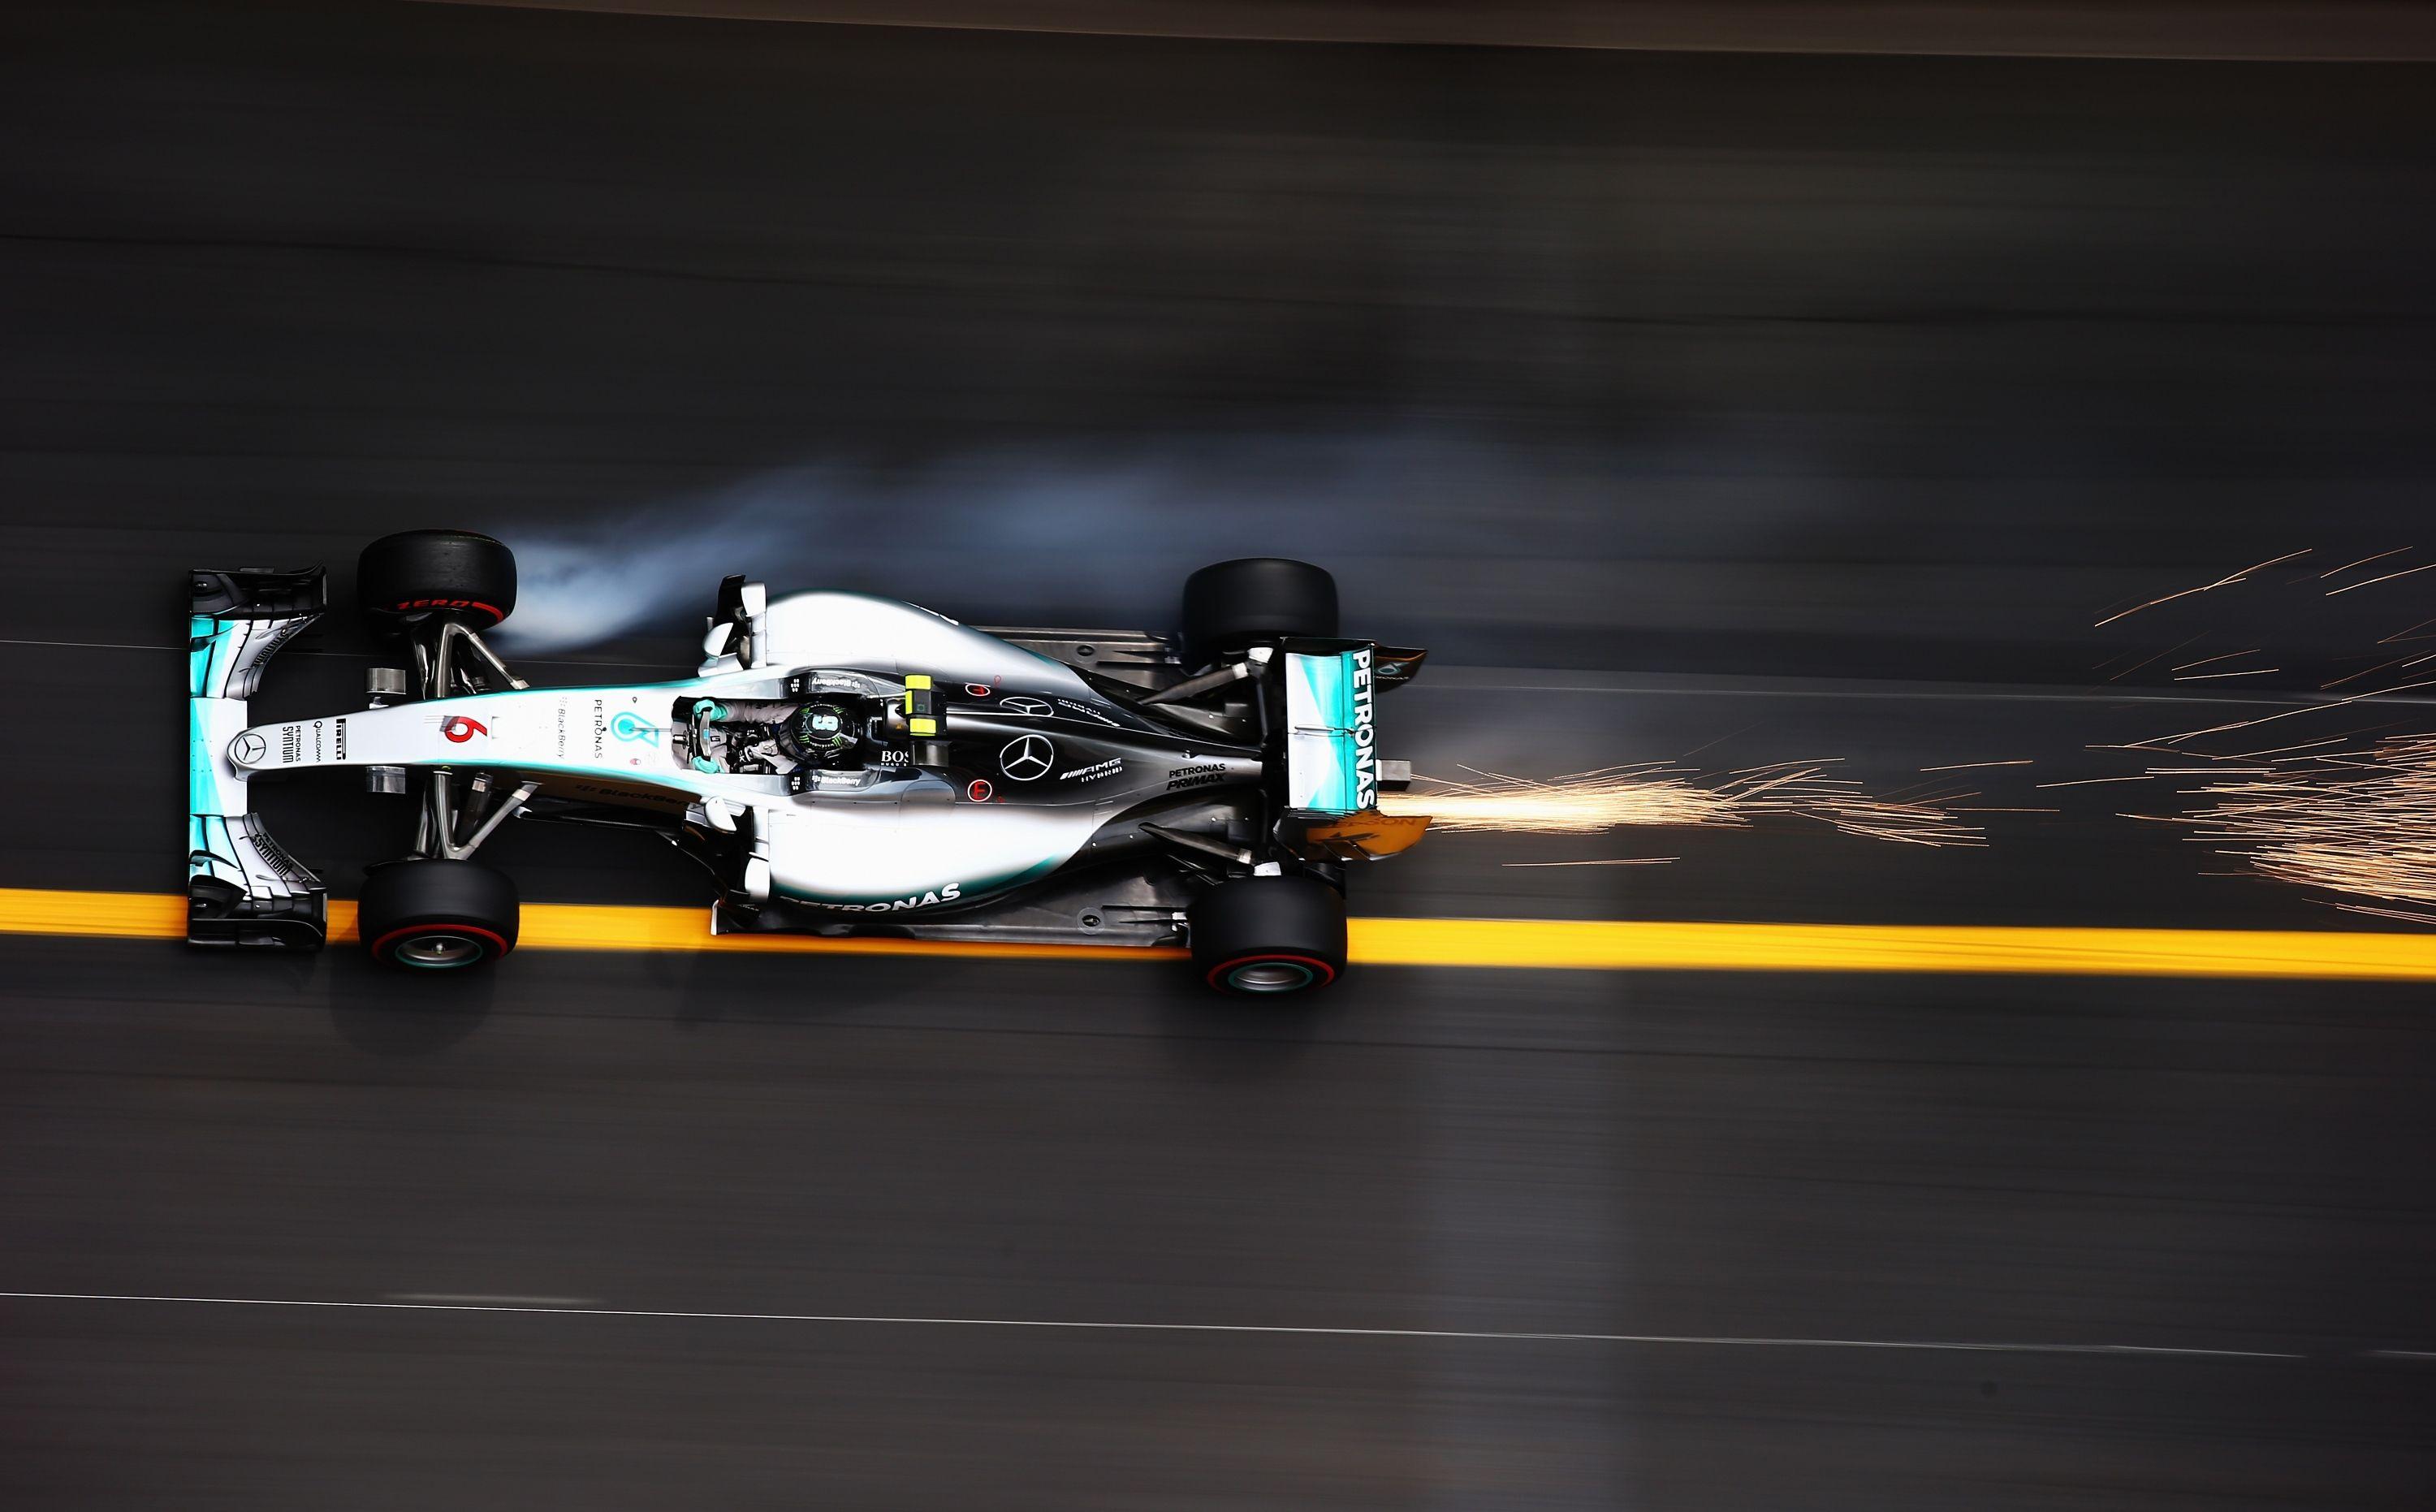 Nico Rosberg lock up and sparks [000×862]